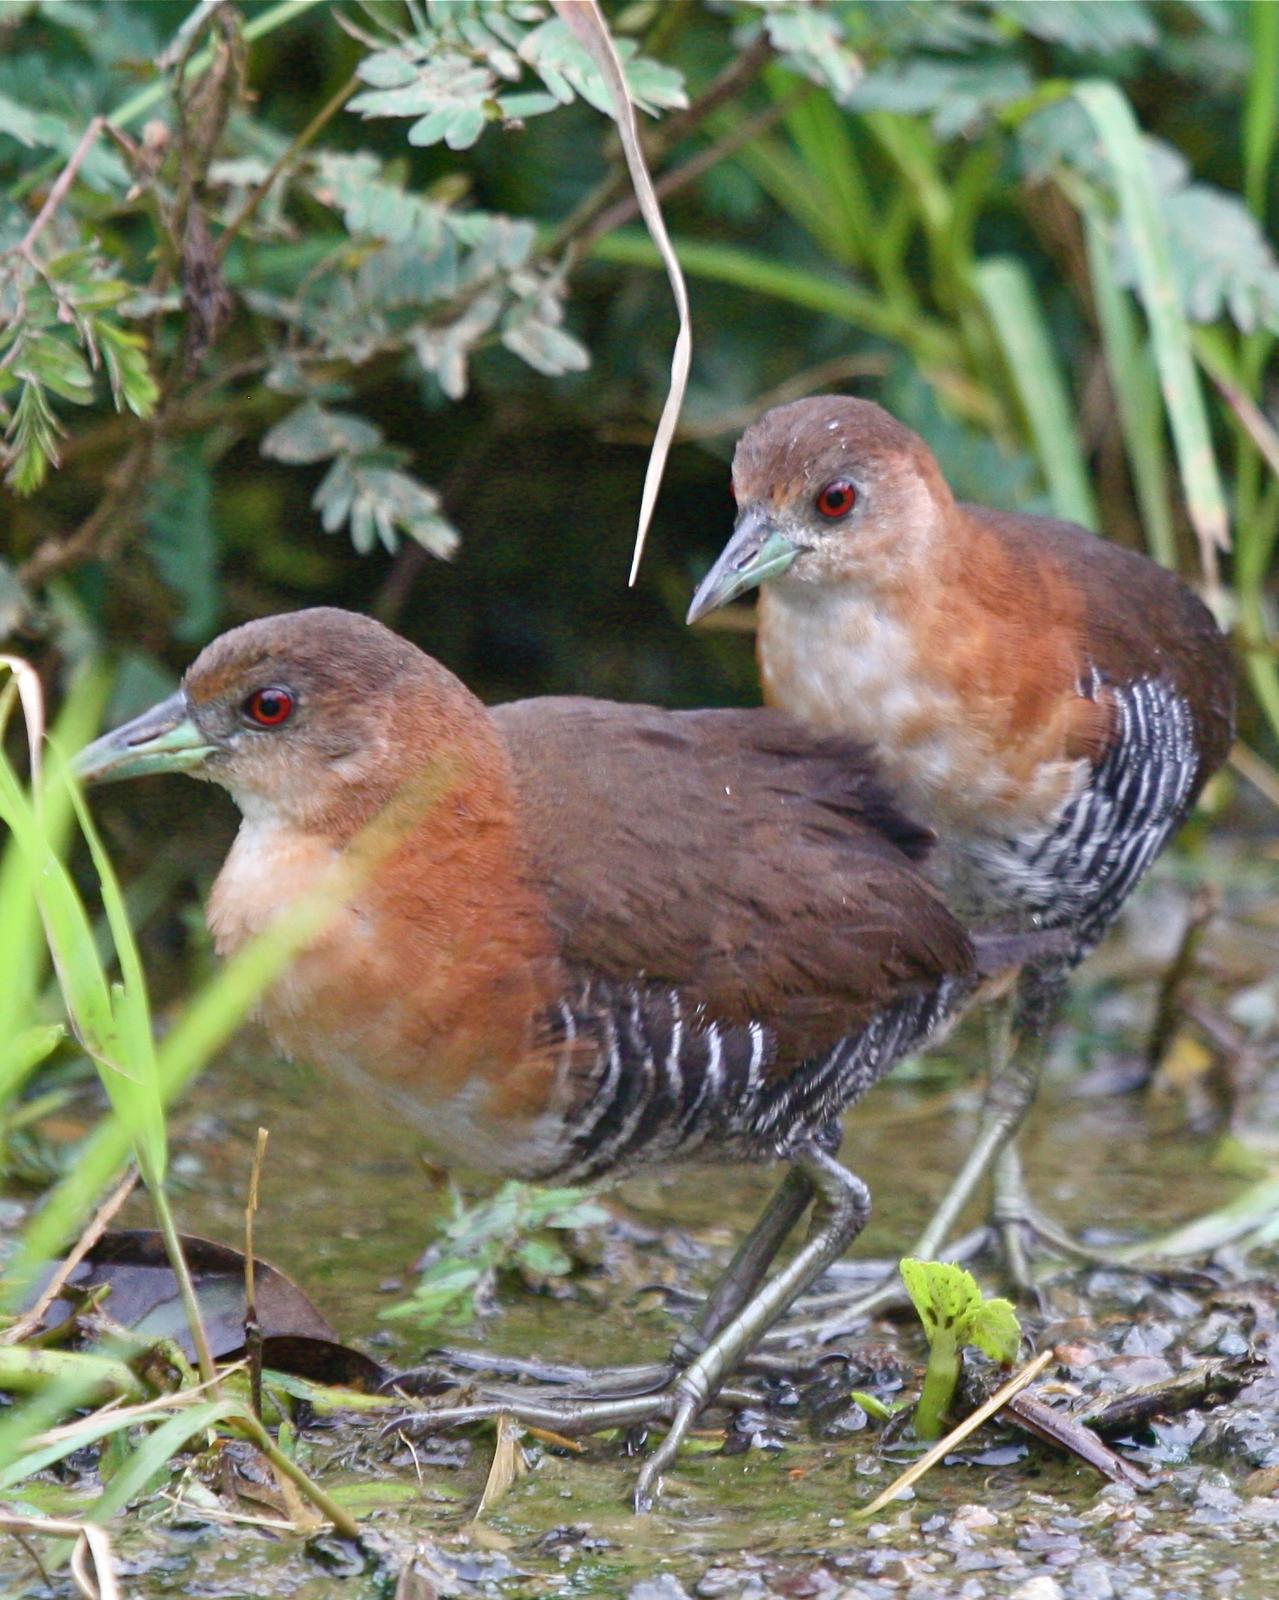 White-throated Crake Photo by Michael L. P. Retter